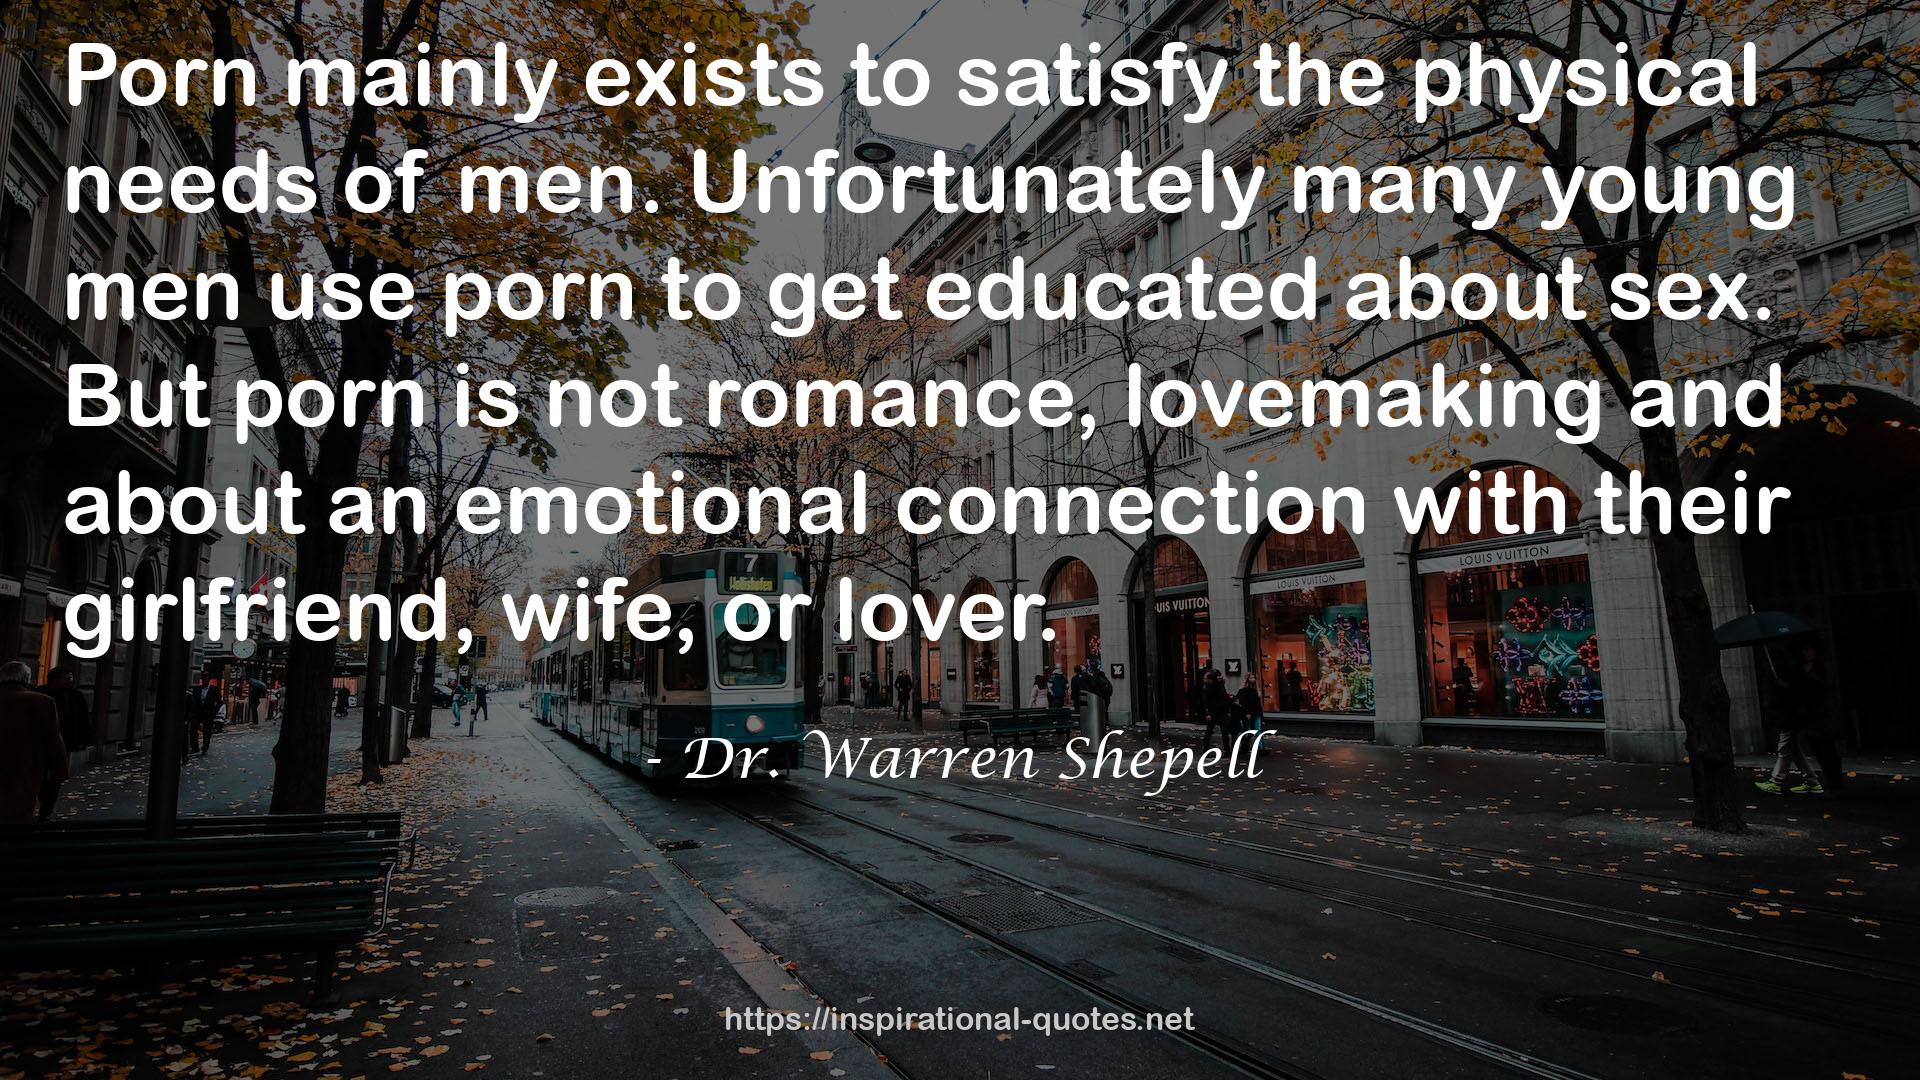 Dr. Warren Shepell QUOTES